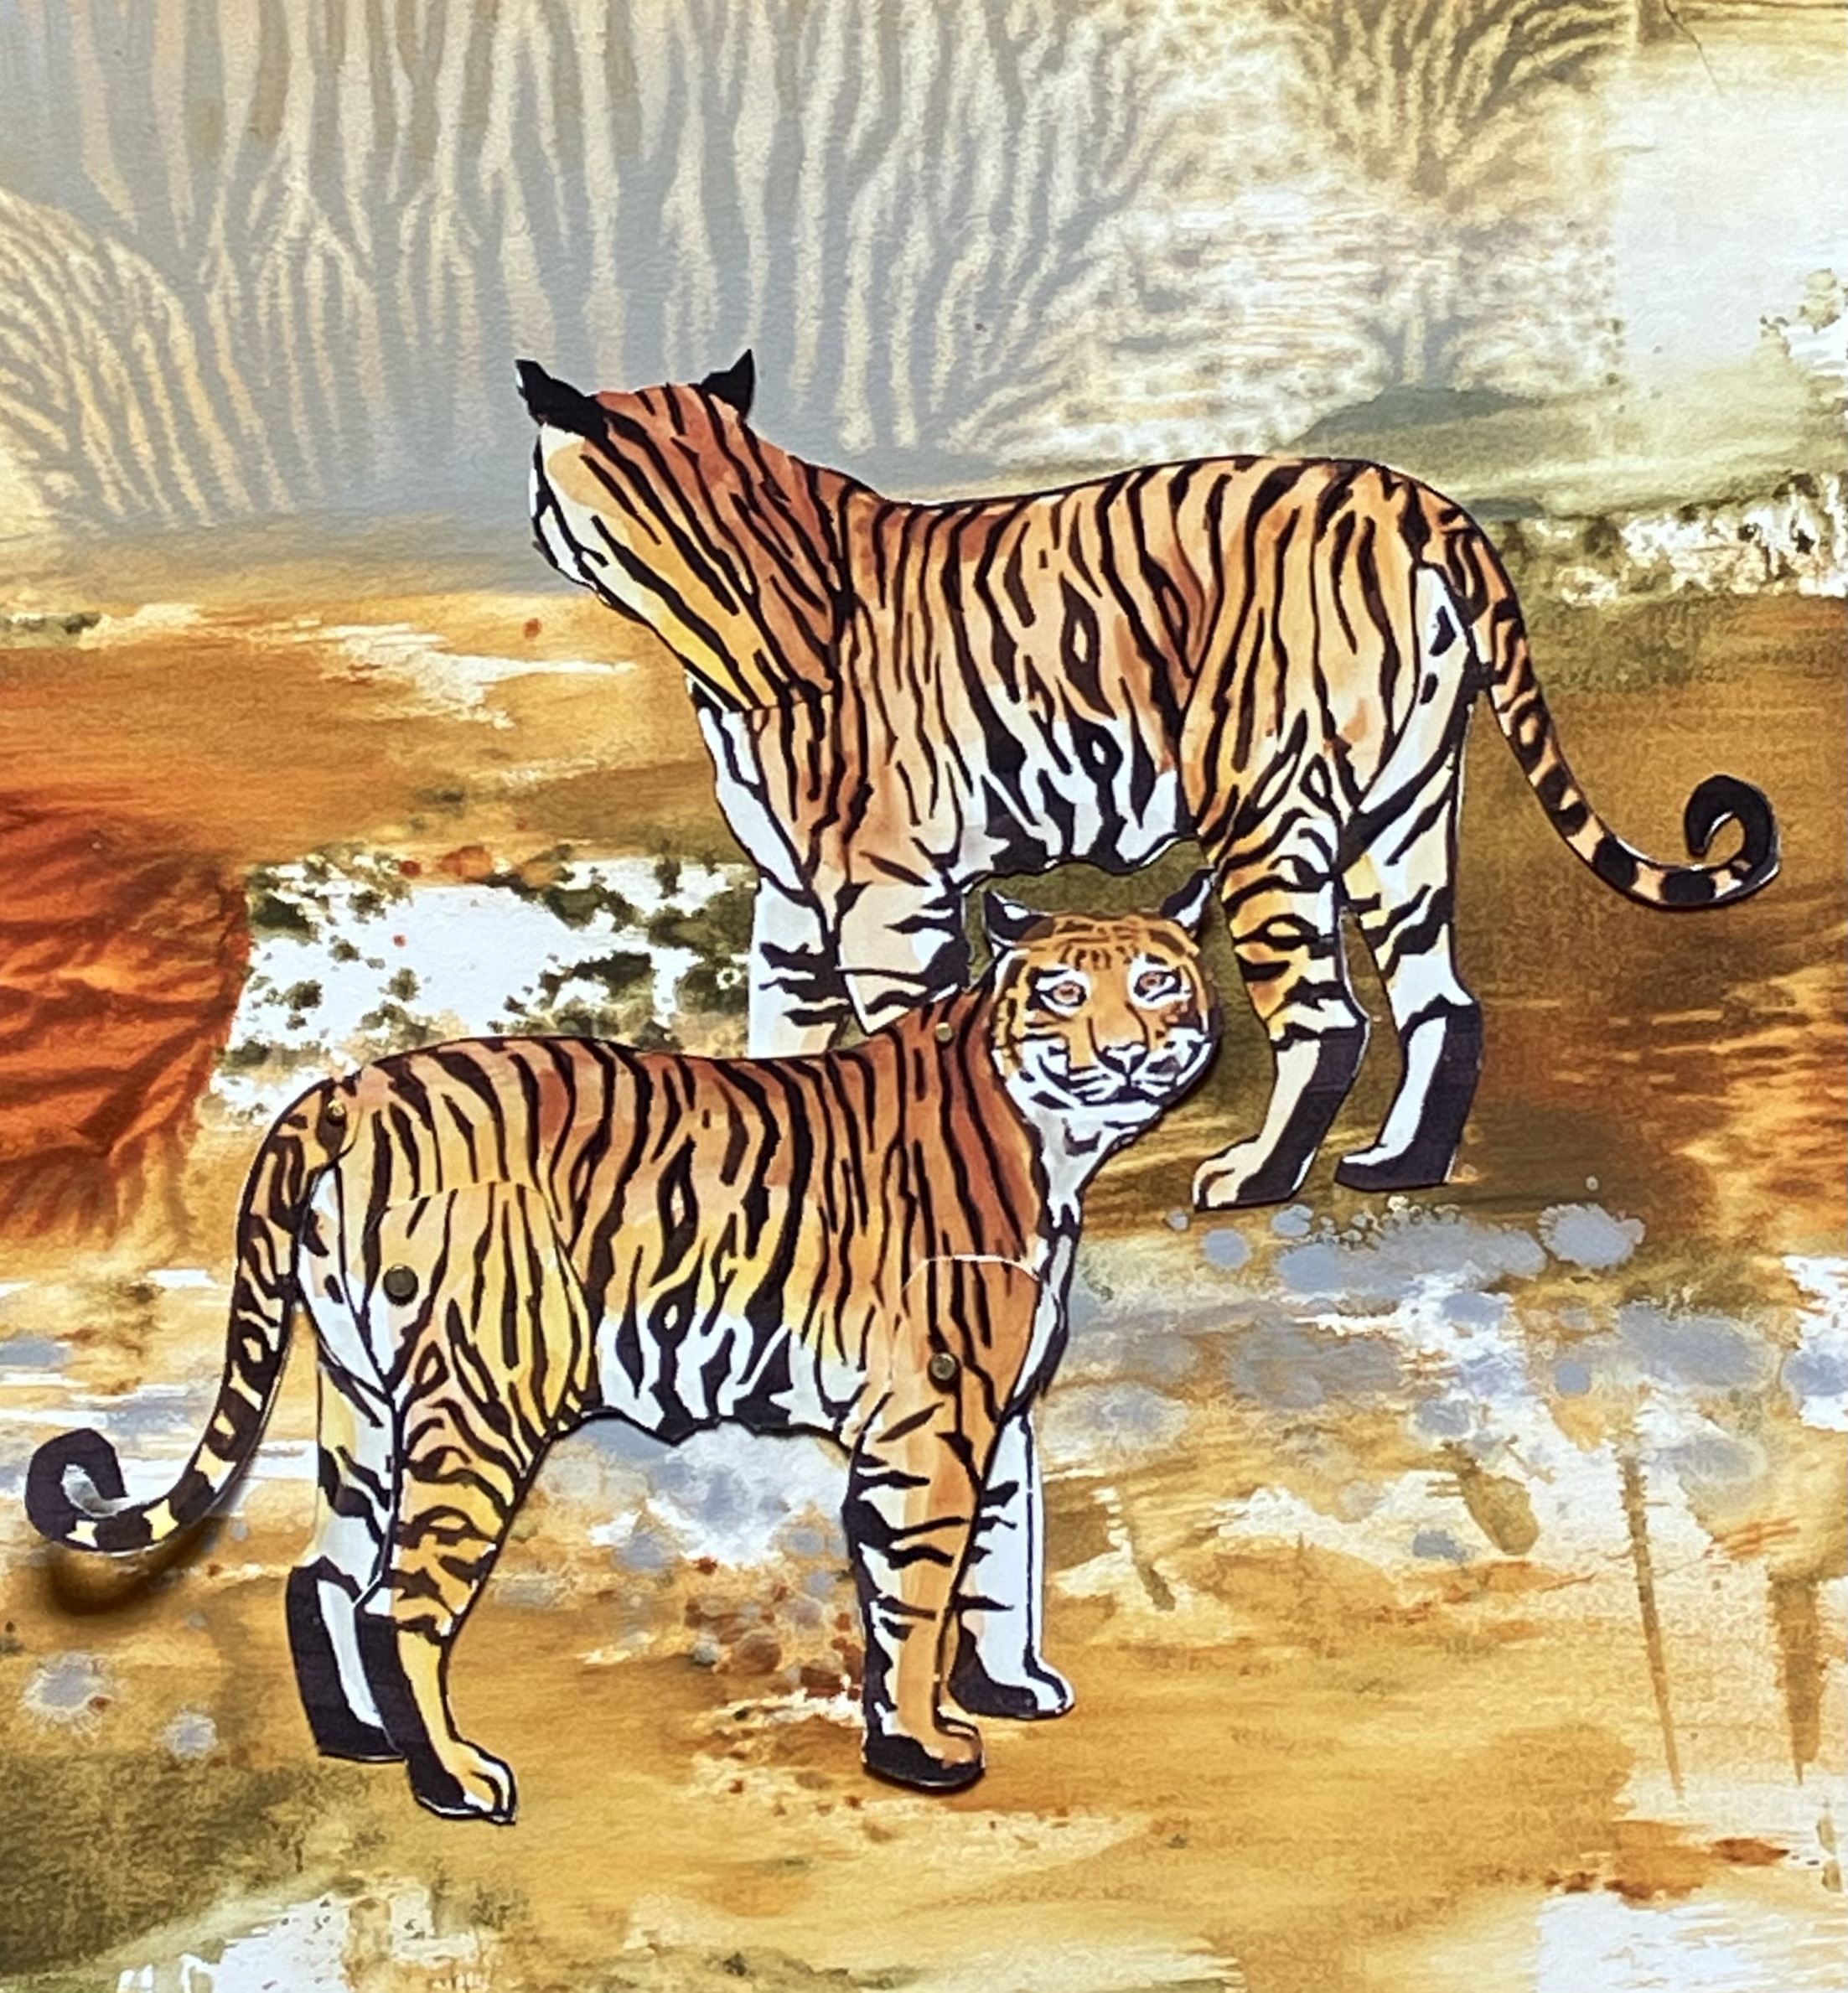 painting of two tigers in a landscape with one facing forward and one facing away